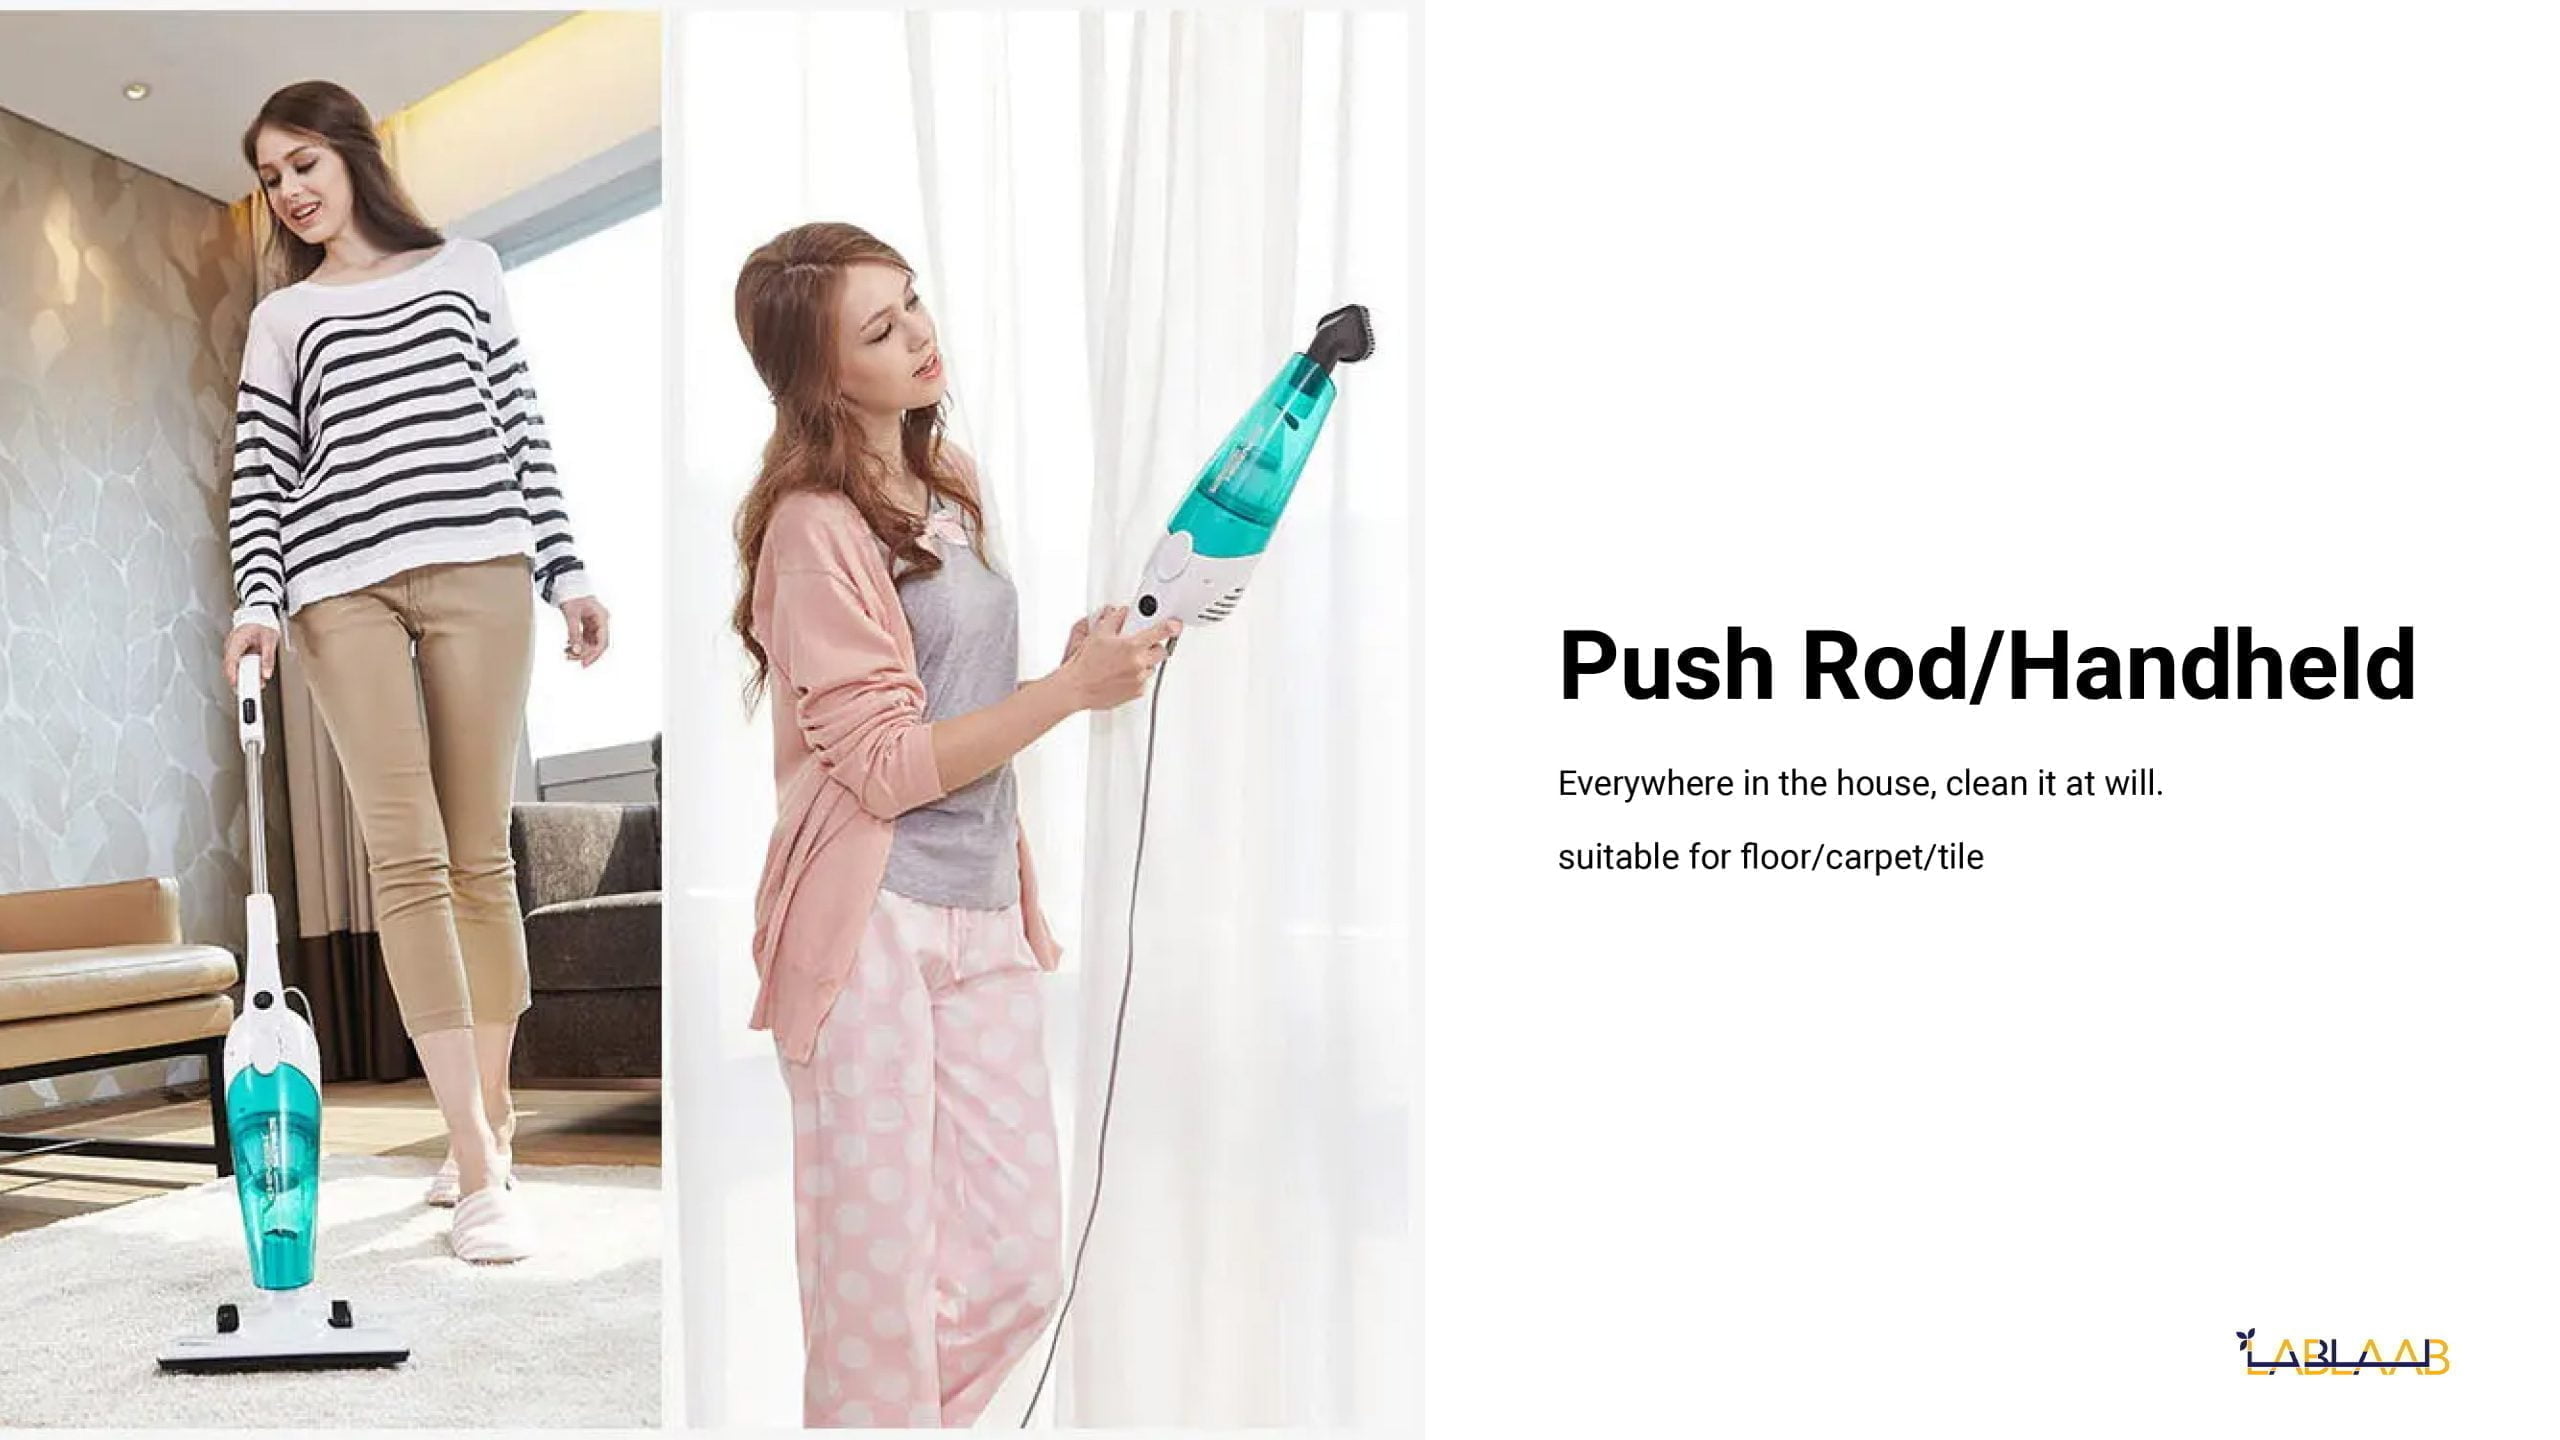 Vacuum 333 04 Scaled Xiaomi Deerma Dx118C Upright Vacuum Cleaner Mini 2-In-1 Pushrod Handheld Cleaner With 16000Pa Super Suction- Green Https://Www.youtube.com/Watch?V=A4_Ujrhyw_I Deerma Dx118C Vacuum Cleaner Deerma Dx118C Vacuum Cleaner 2-In-1 Pushrod Handheld Cleaner With 16000Pa Super Suction